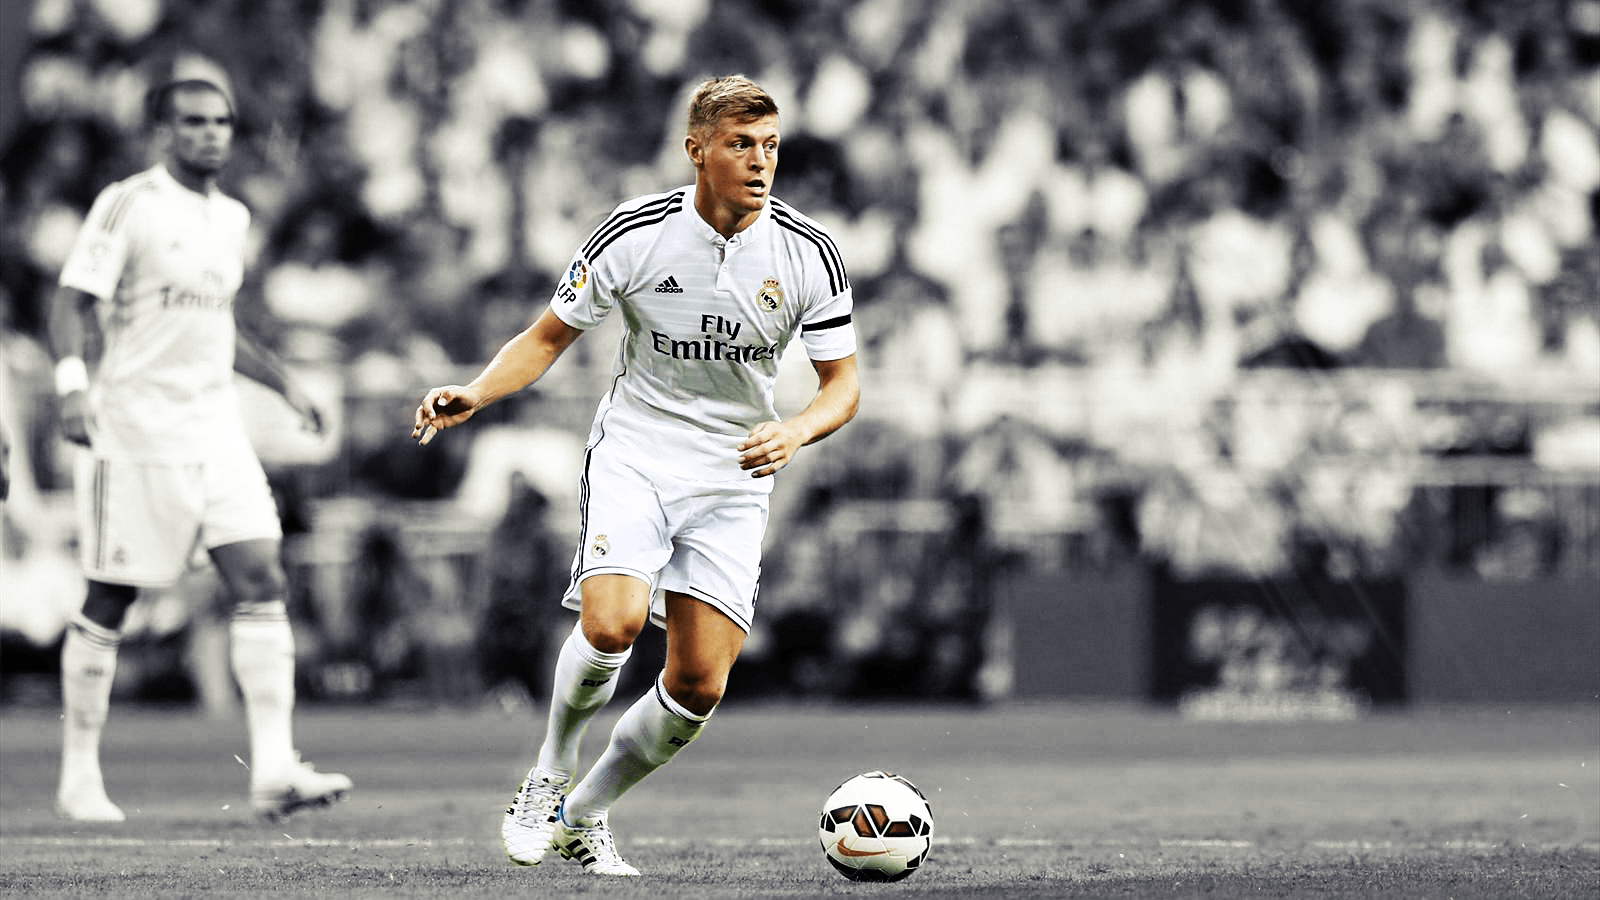 Toni Kroos Wallpapers and Backgrounds Image.